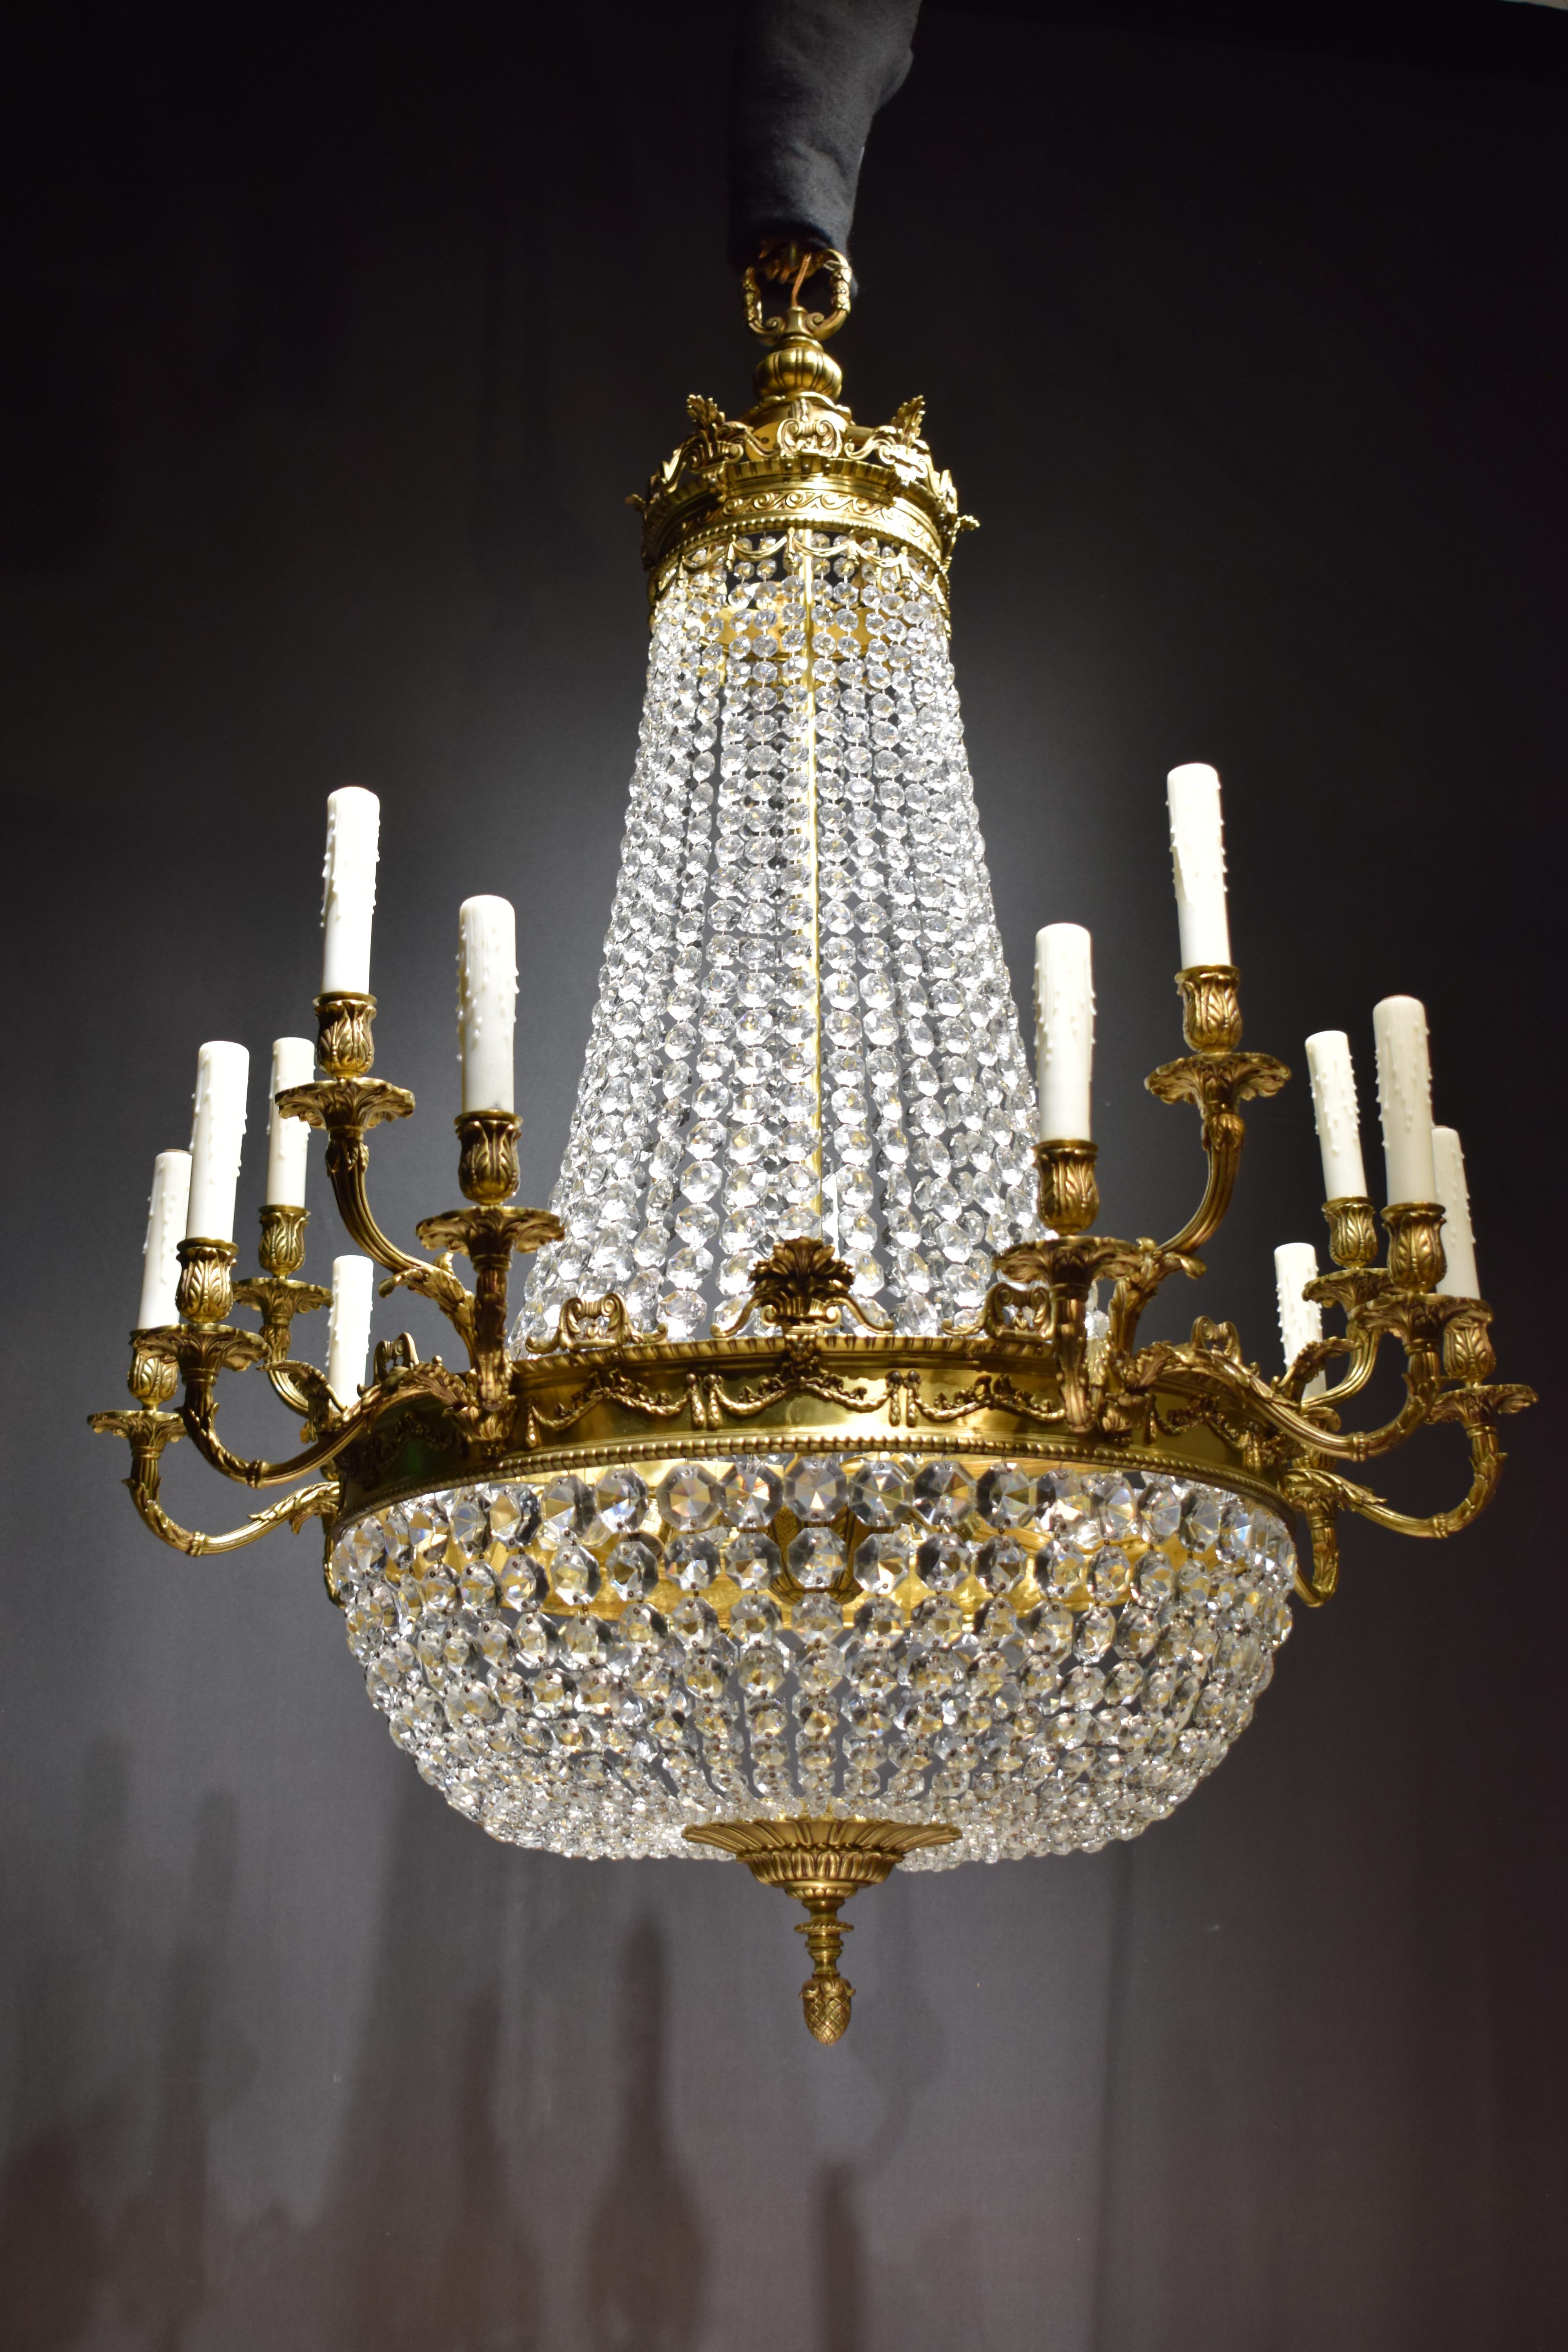 A Superb Gilt Bronze & Crystal Louis XVI style Chandelier. The main circle decorated with swags issuing five groups of three arms, graduated octagon chains conform the 